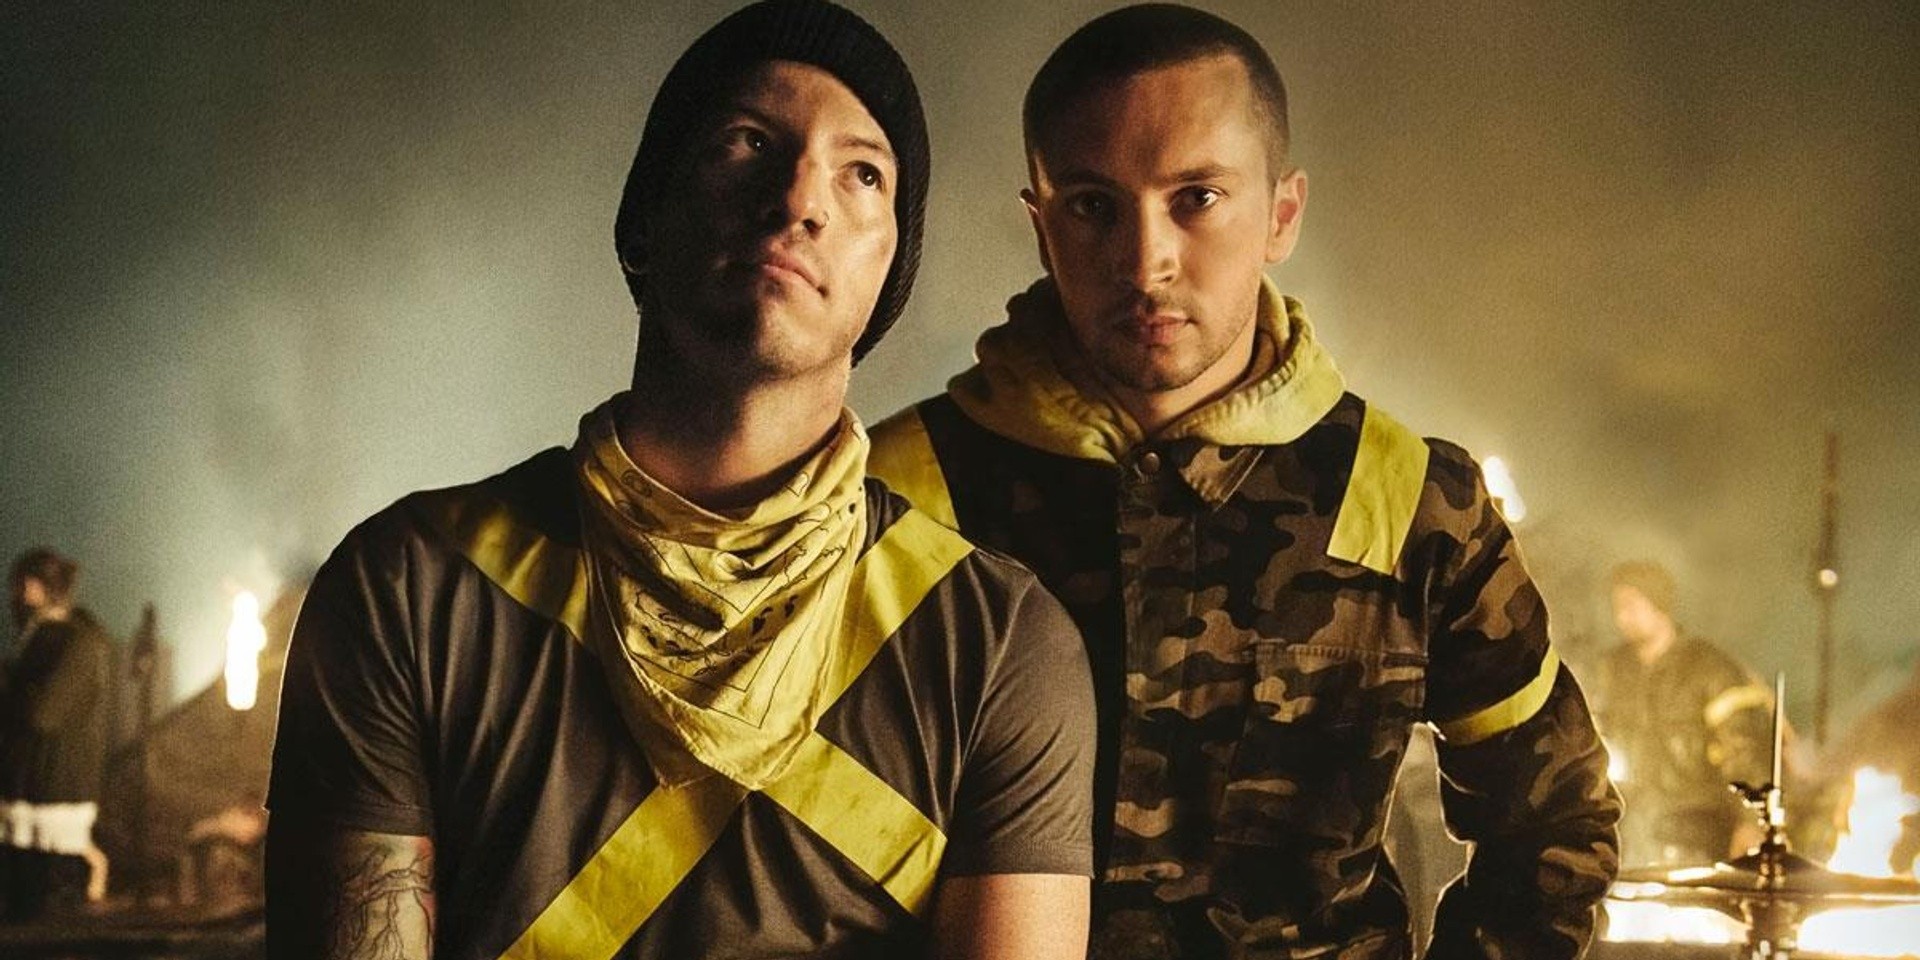 Twenty One Pilots now holds the most streamed album of all time by a group or band